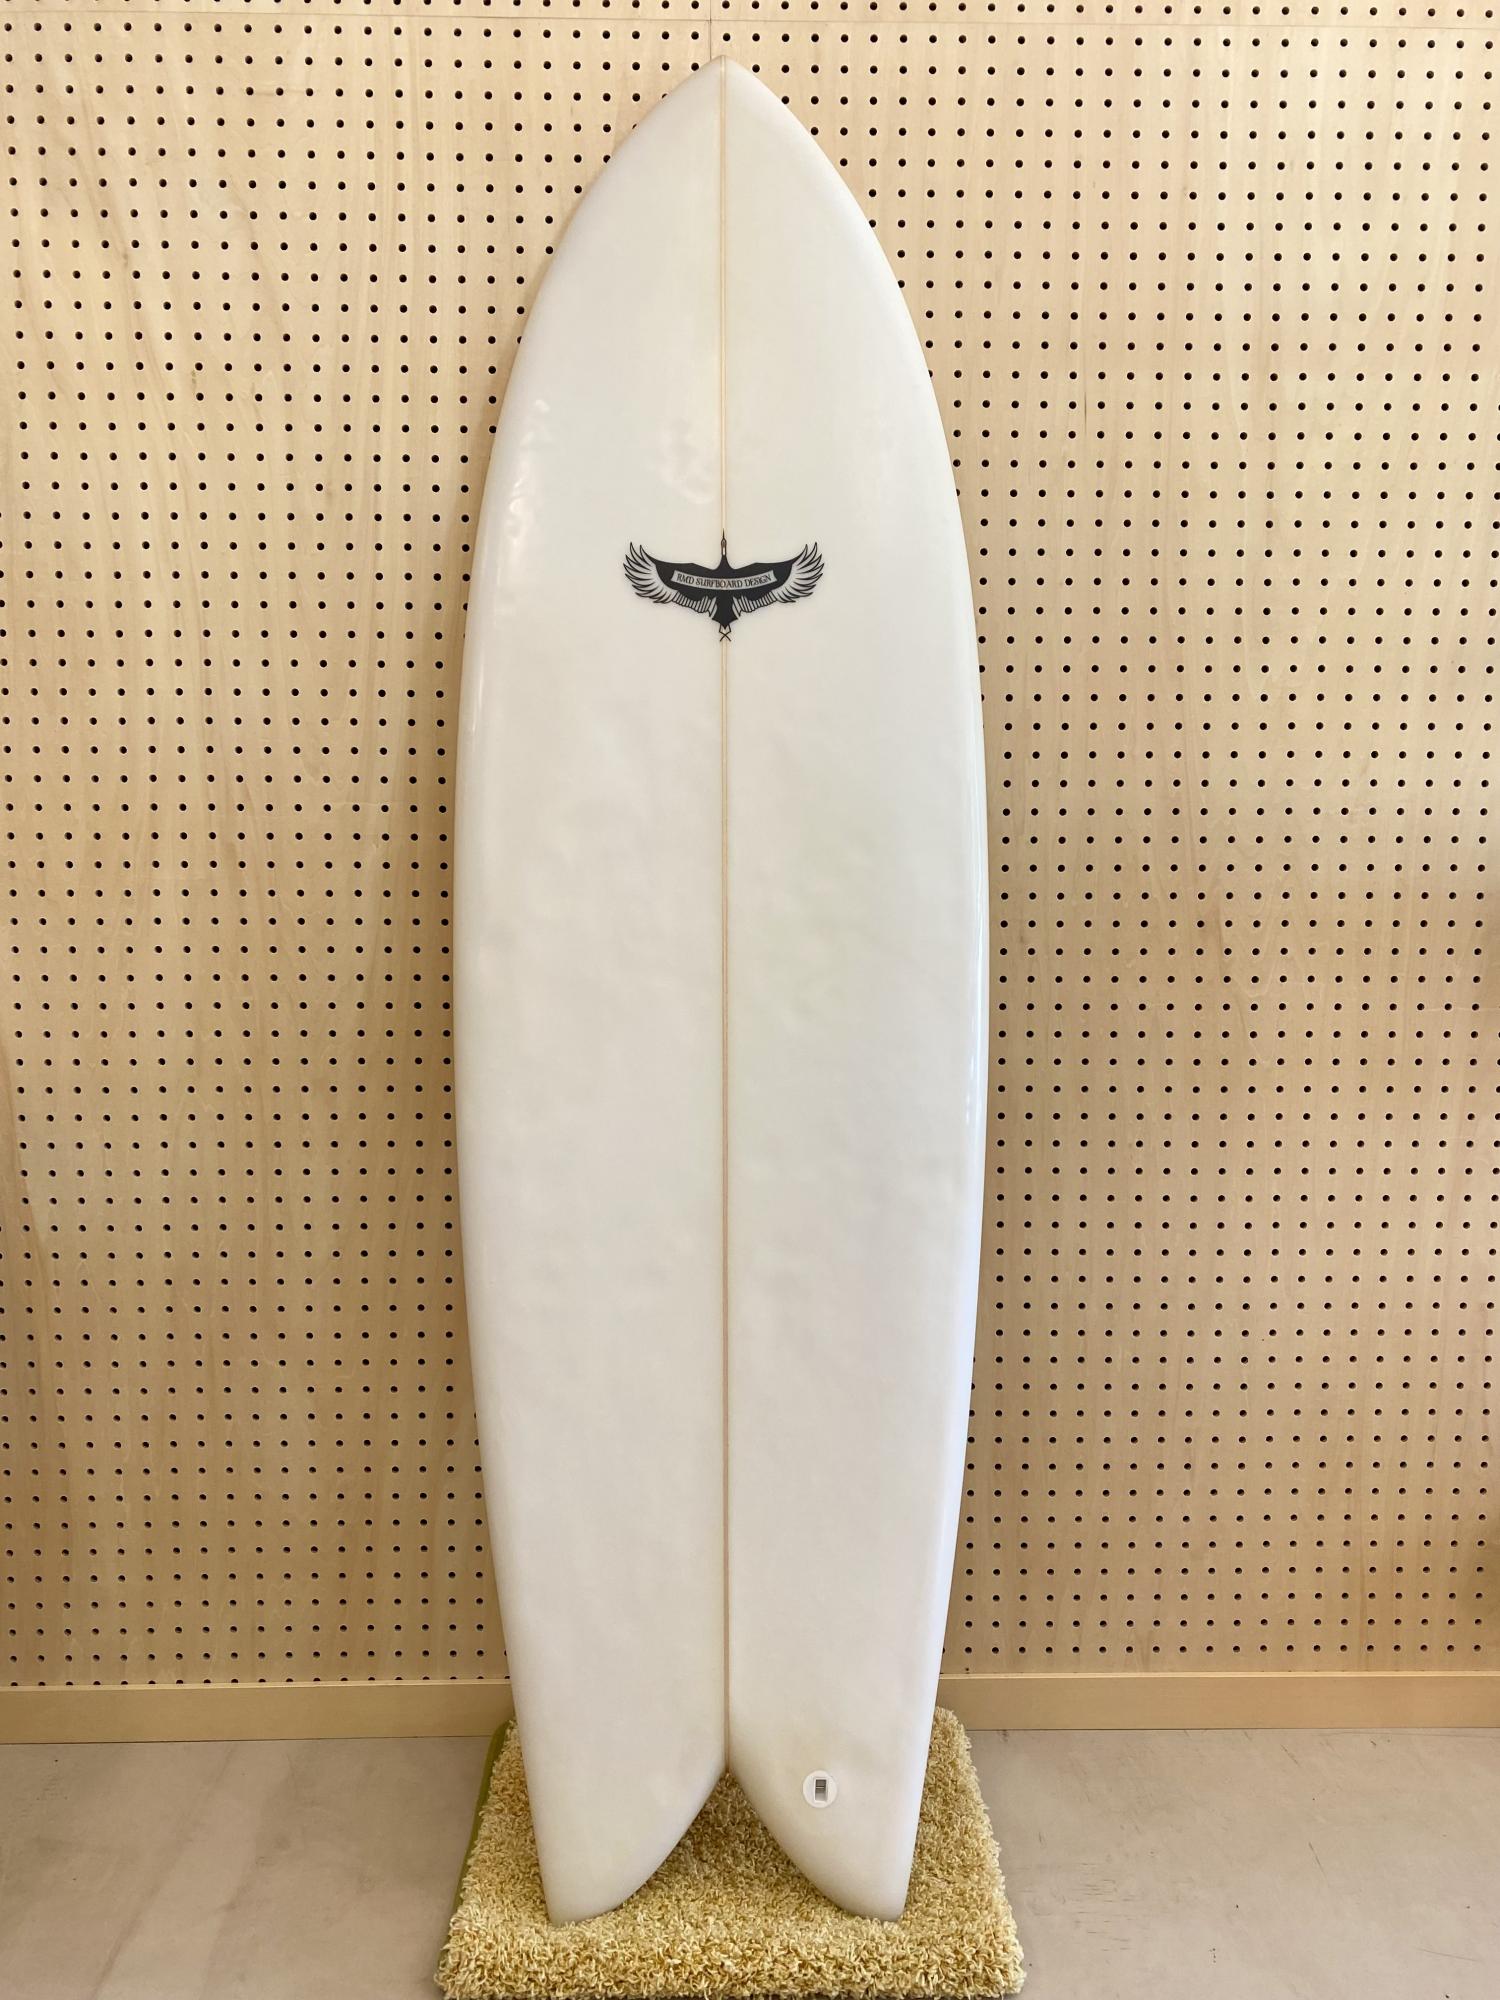 USED BOARDS（RMD SURFBOARDS 5.11 Hybrid Twin)